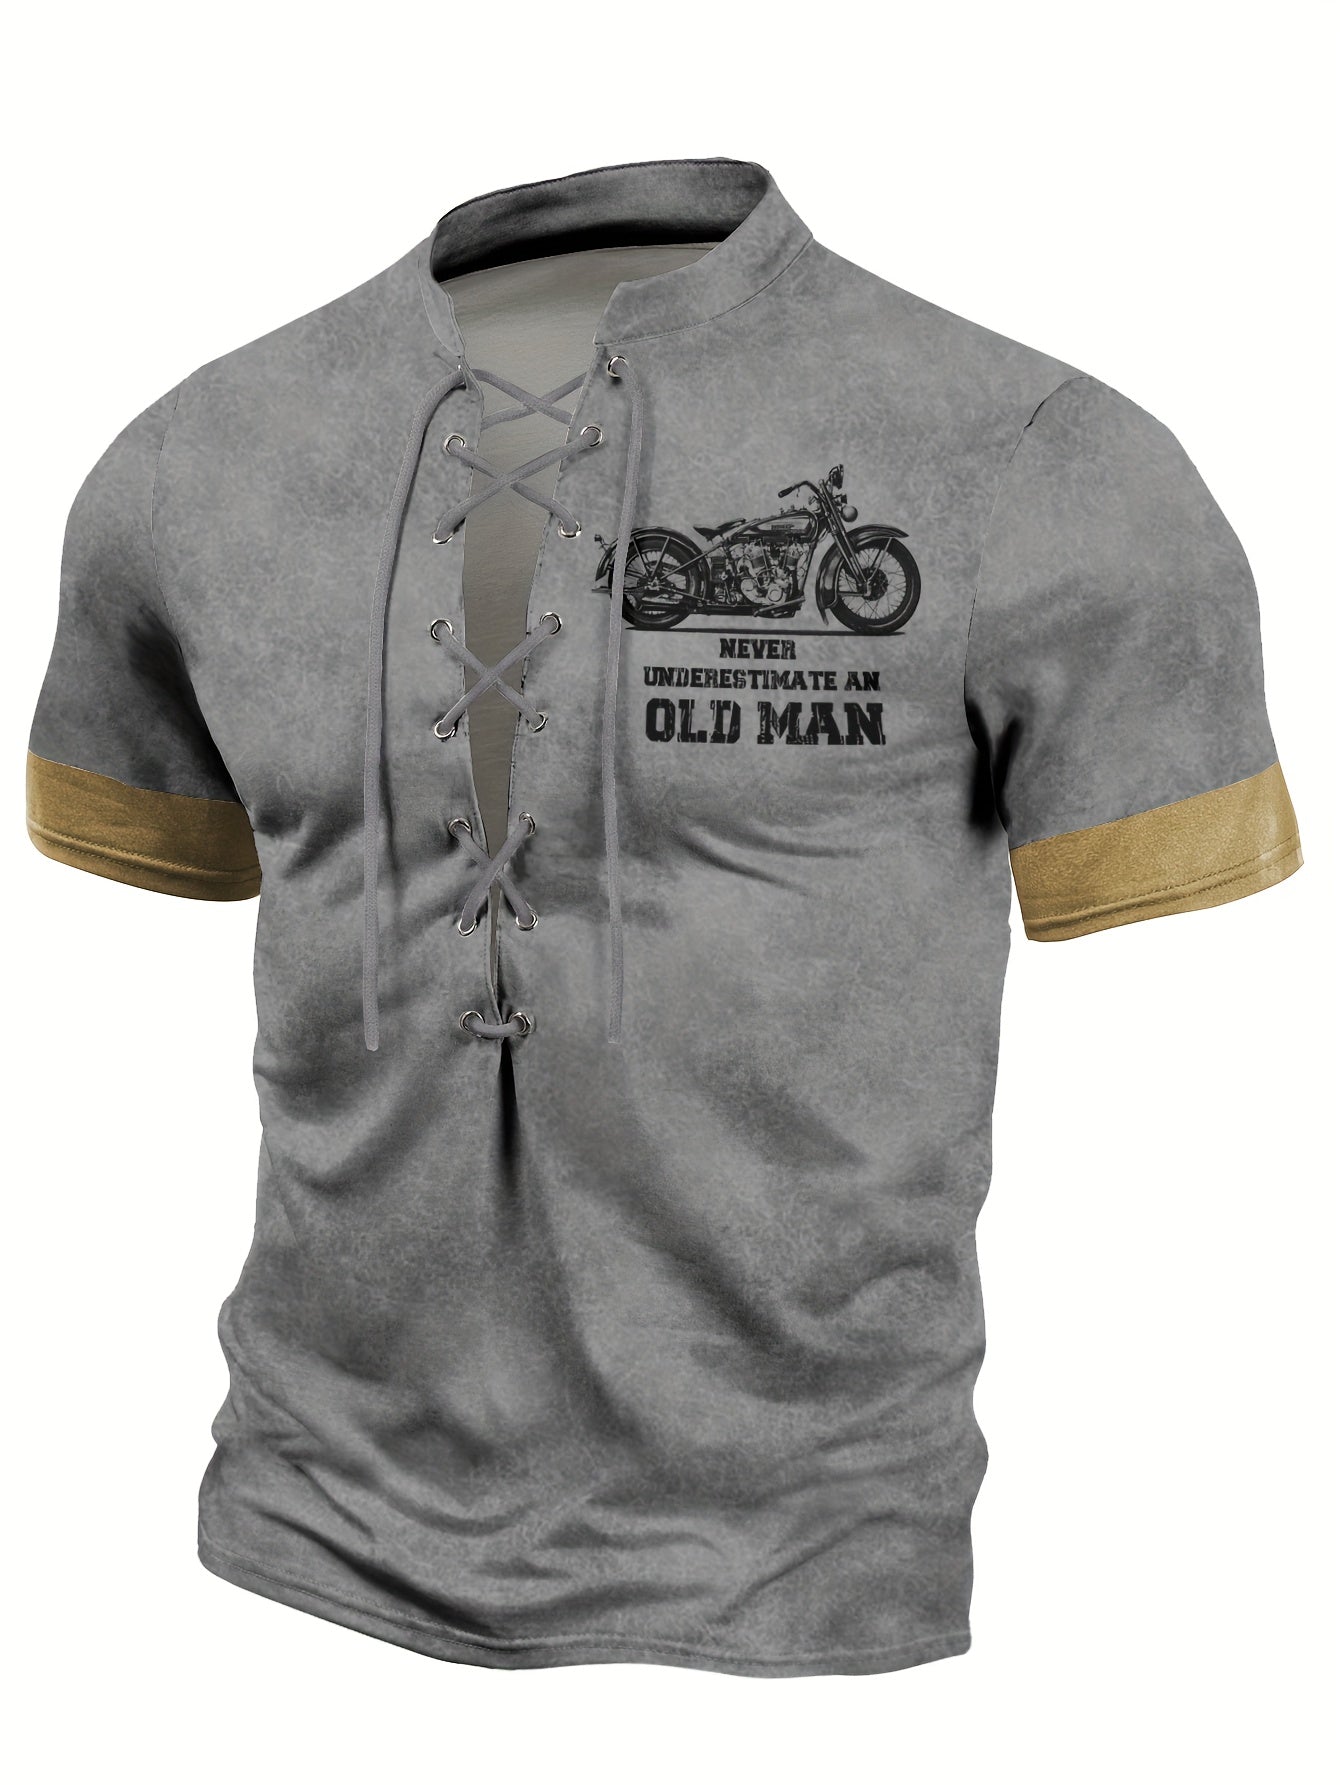 "Men's Motorcycle Print Lace-Up Henley Shirt - Casual and Stretchable Short Sleeve for Spring/Summer"